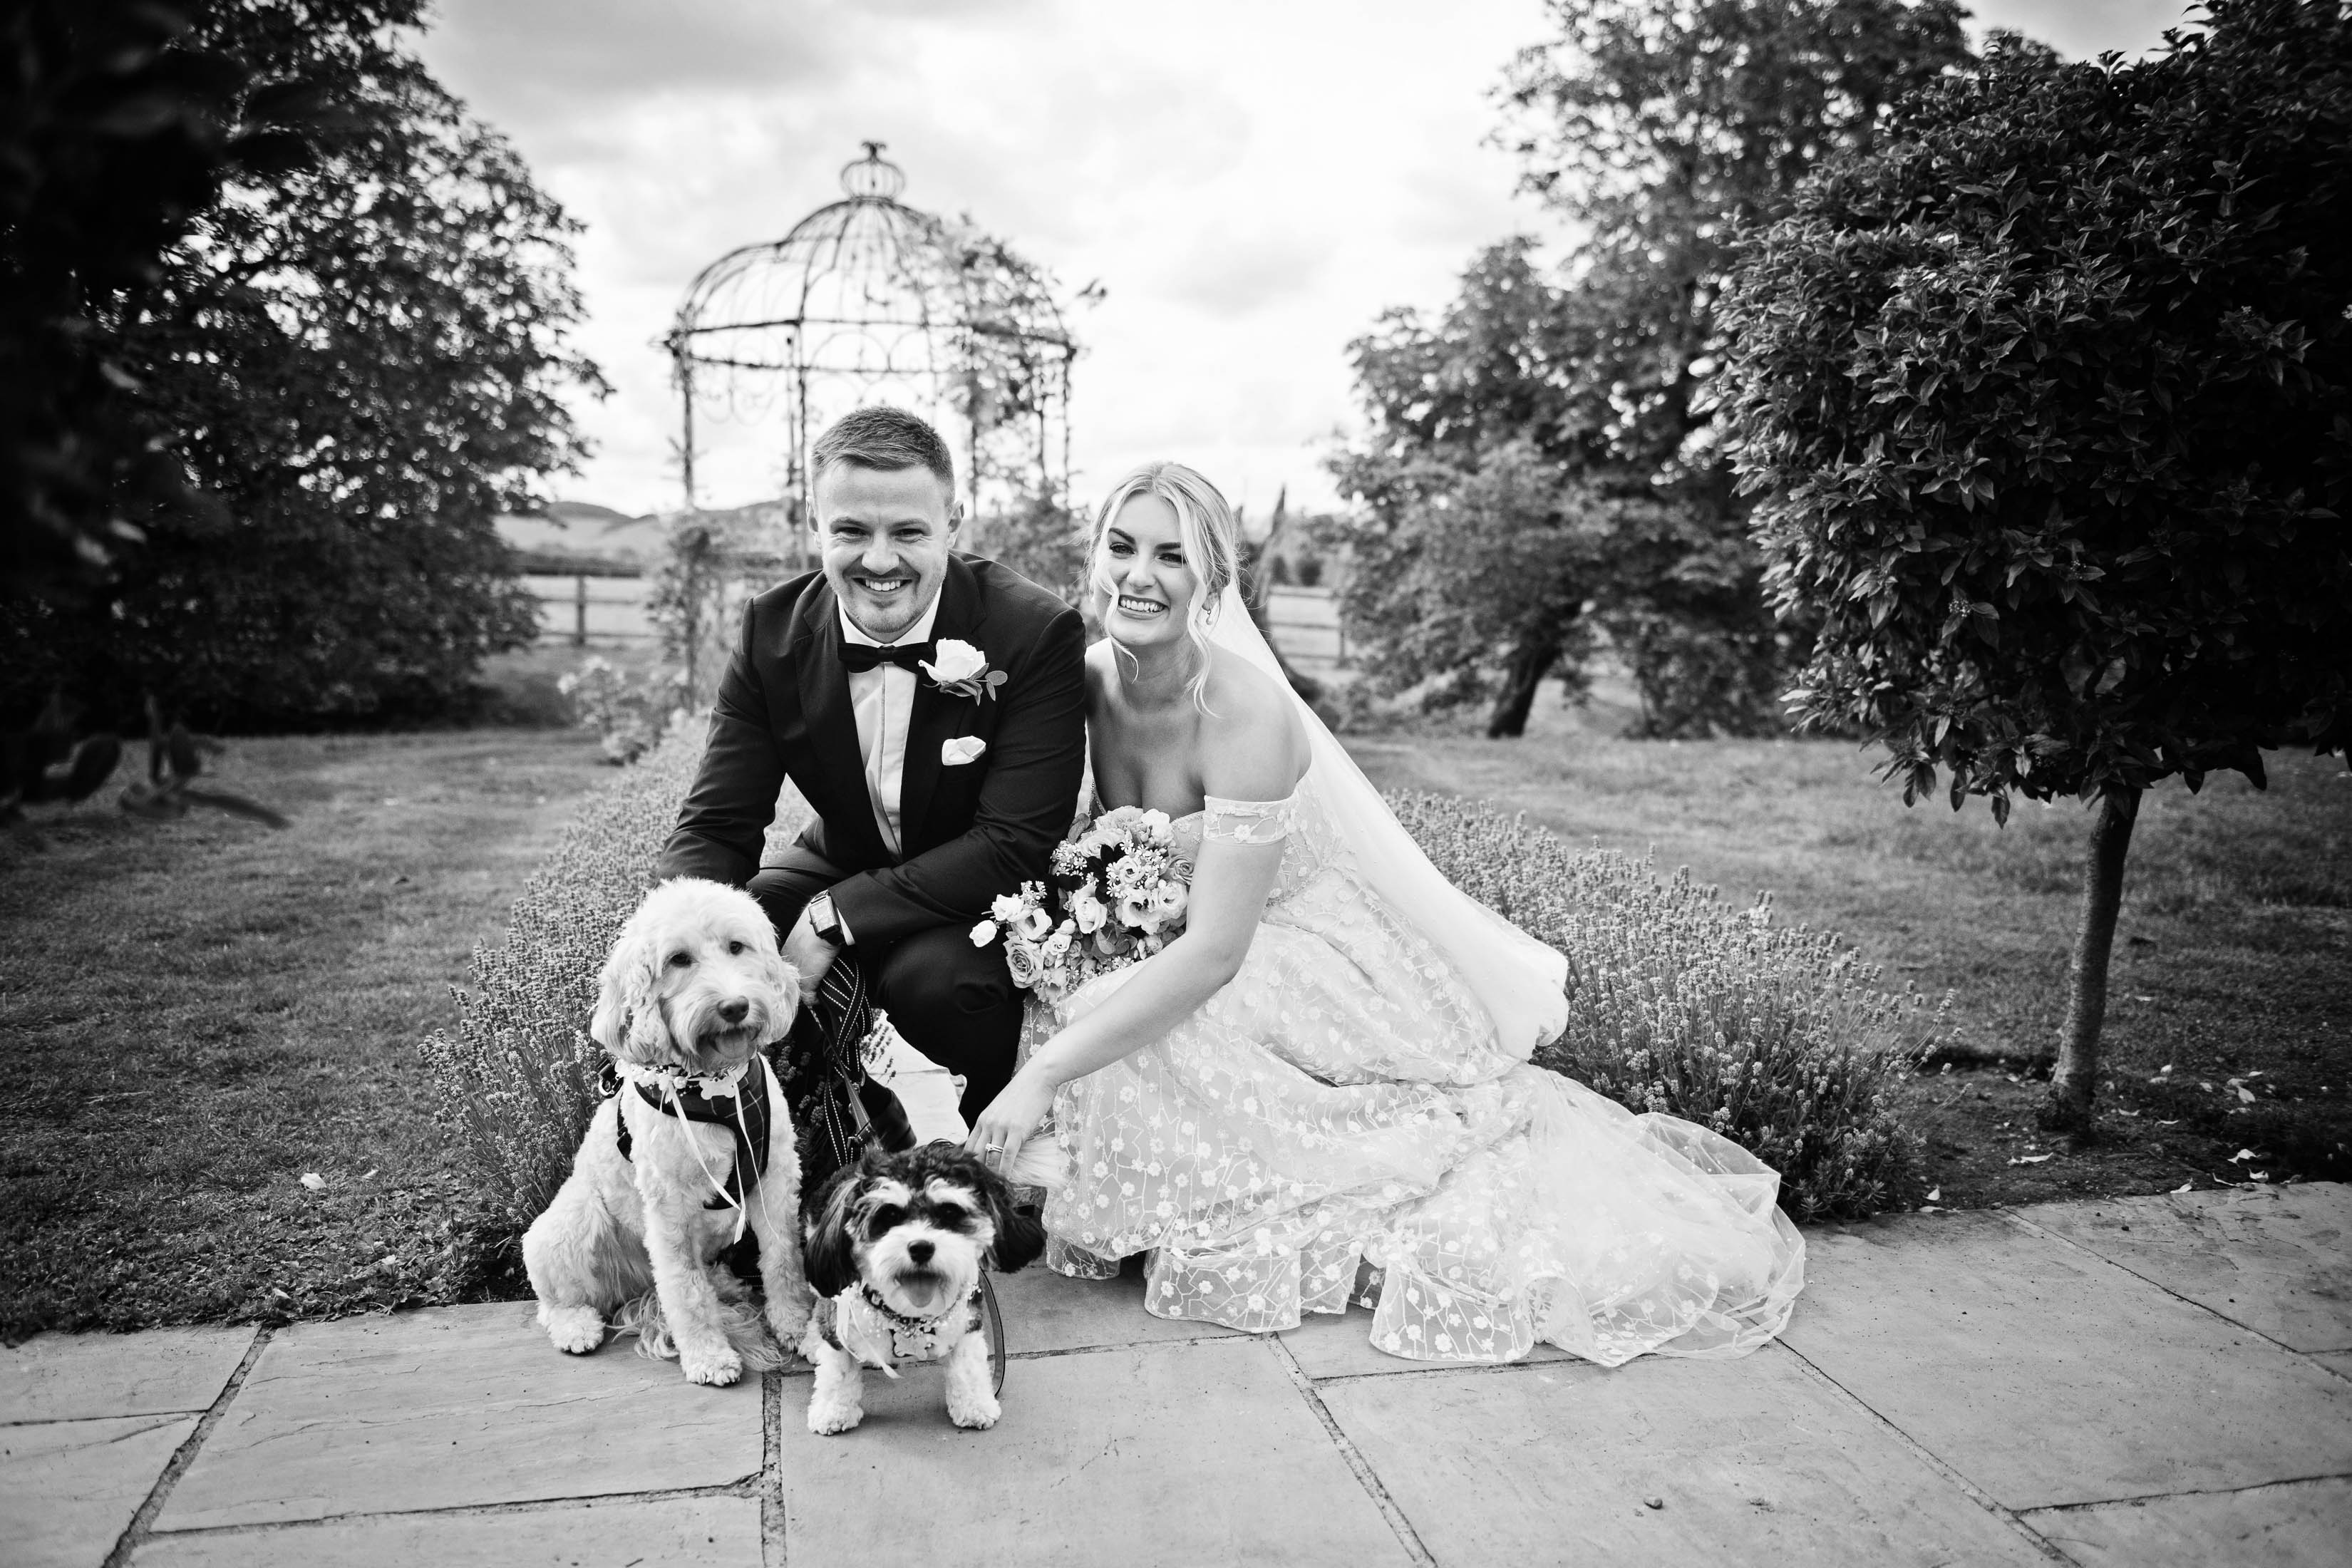 Black & White photograph of a bride and groom with their dog, tree's and a wedding arch behind them.